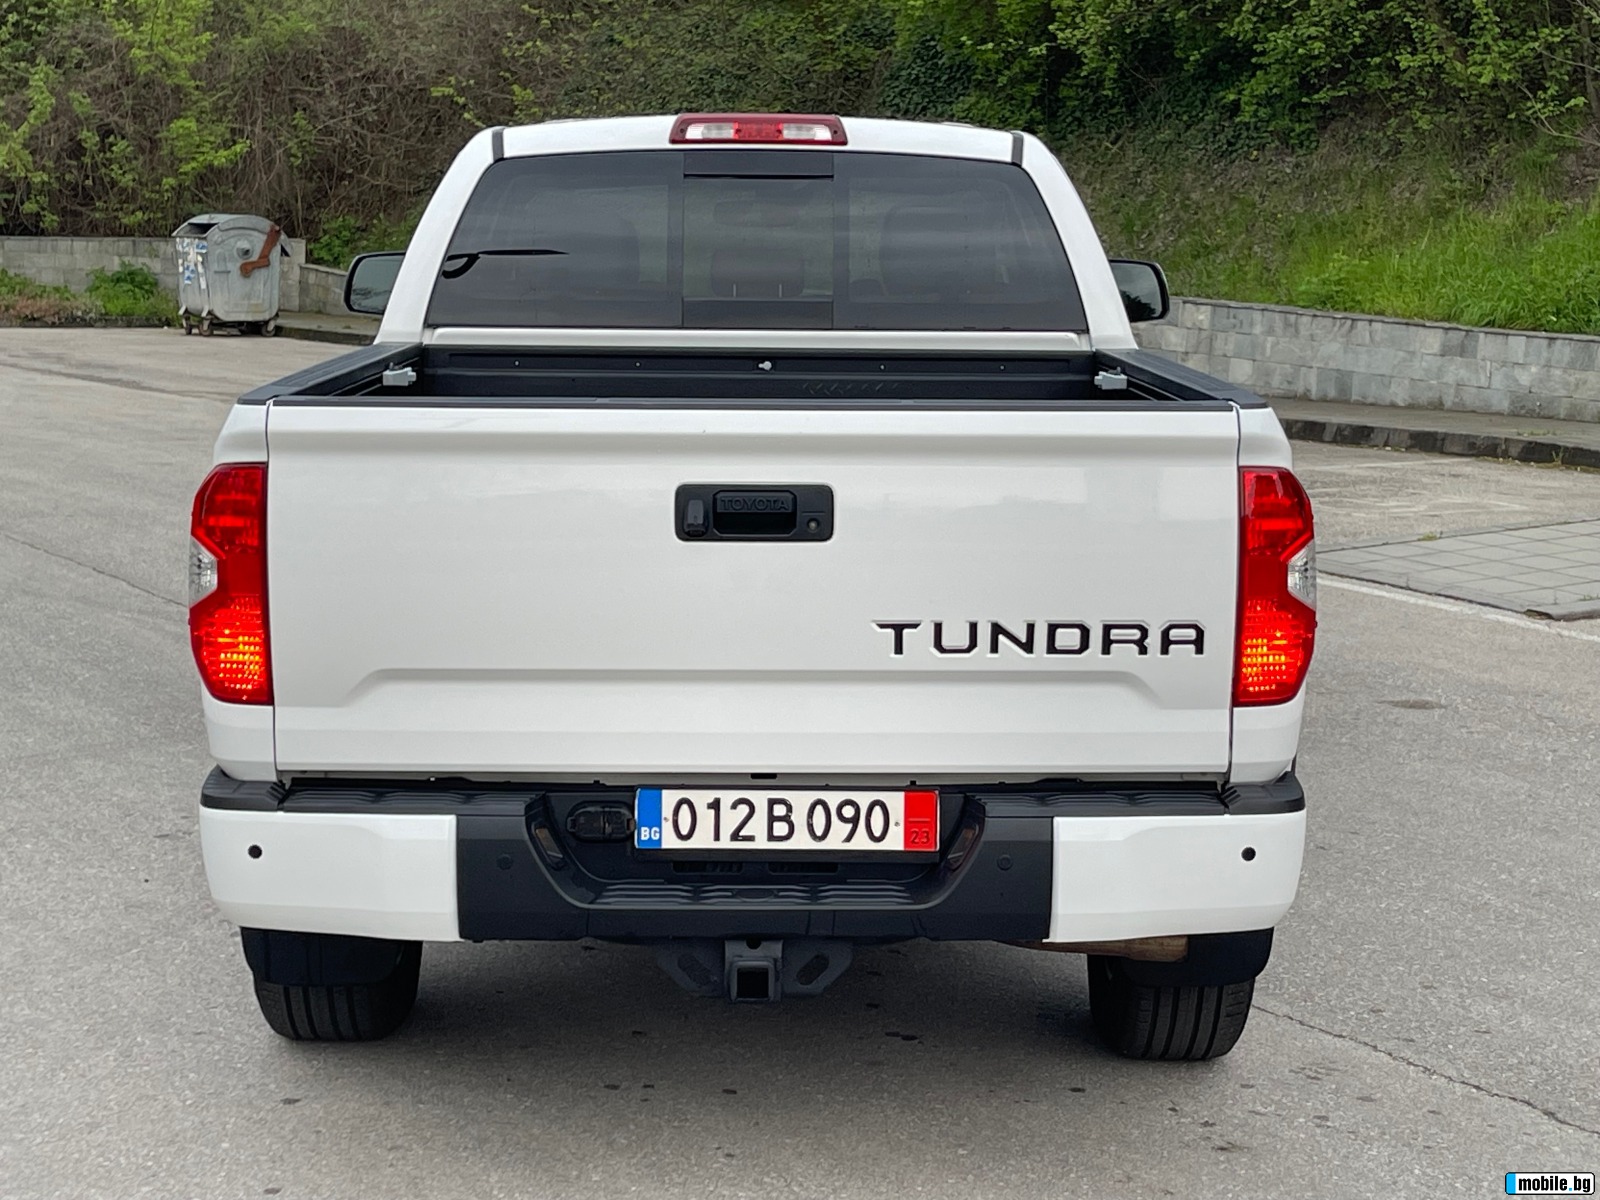 Toyota Tundra 5.7i*Facelift*TRD-OffRoad-44*Limited* | Mobile.bg   3